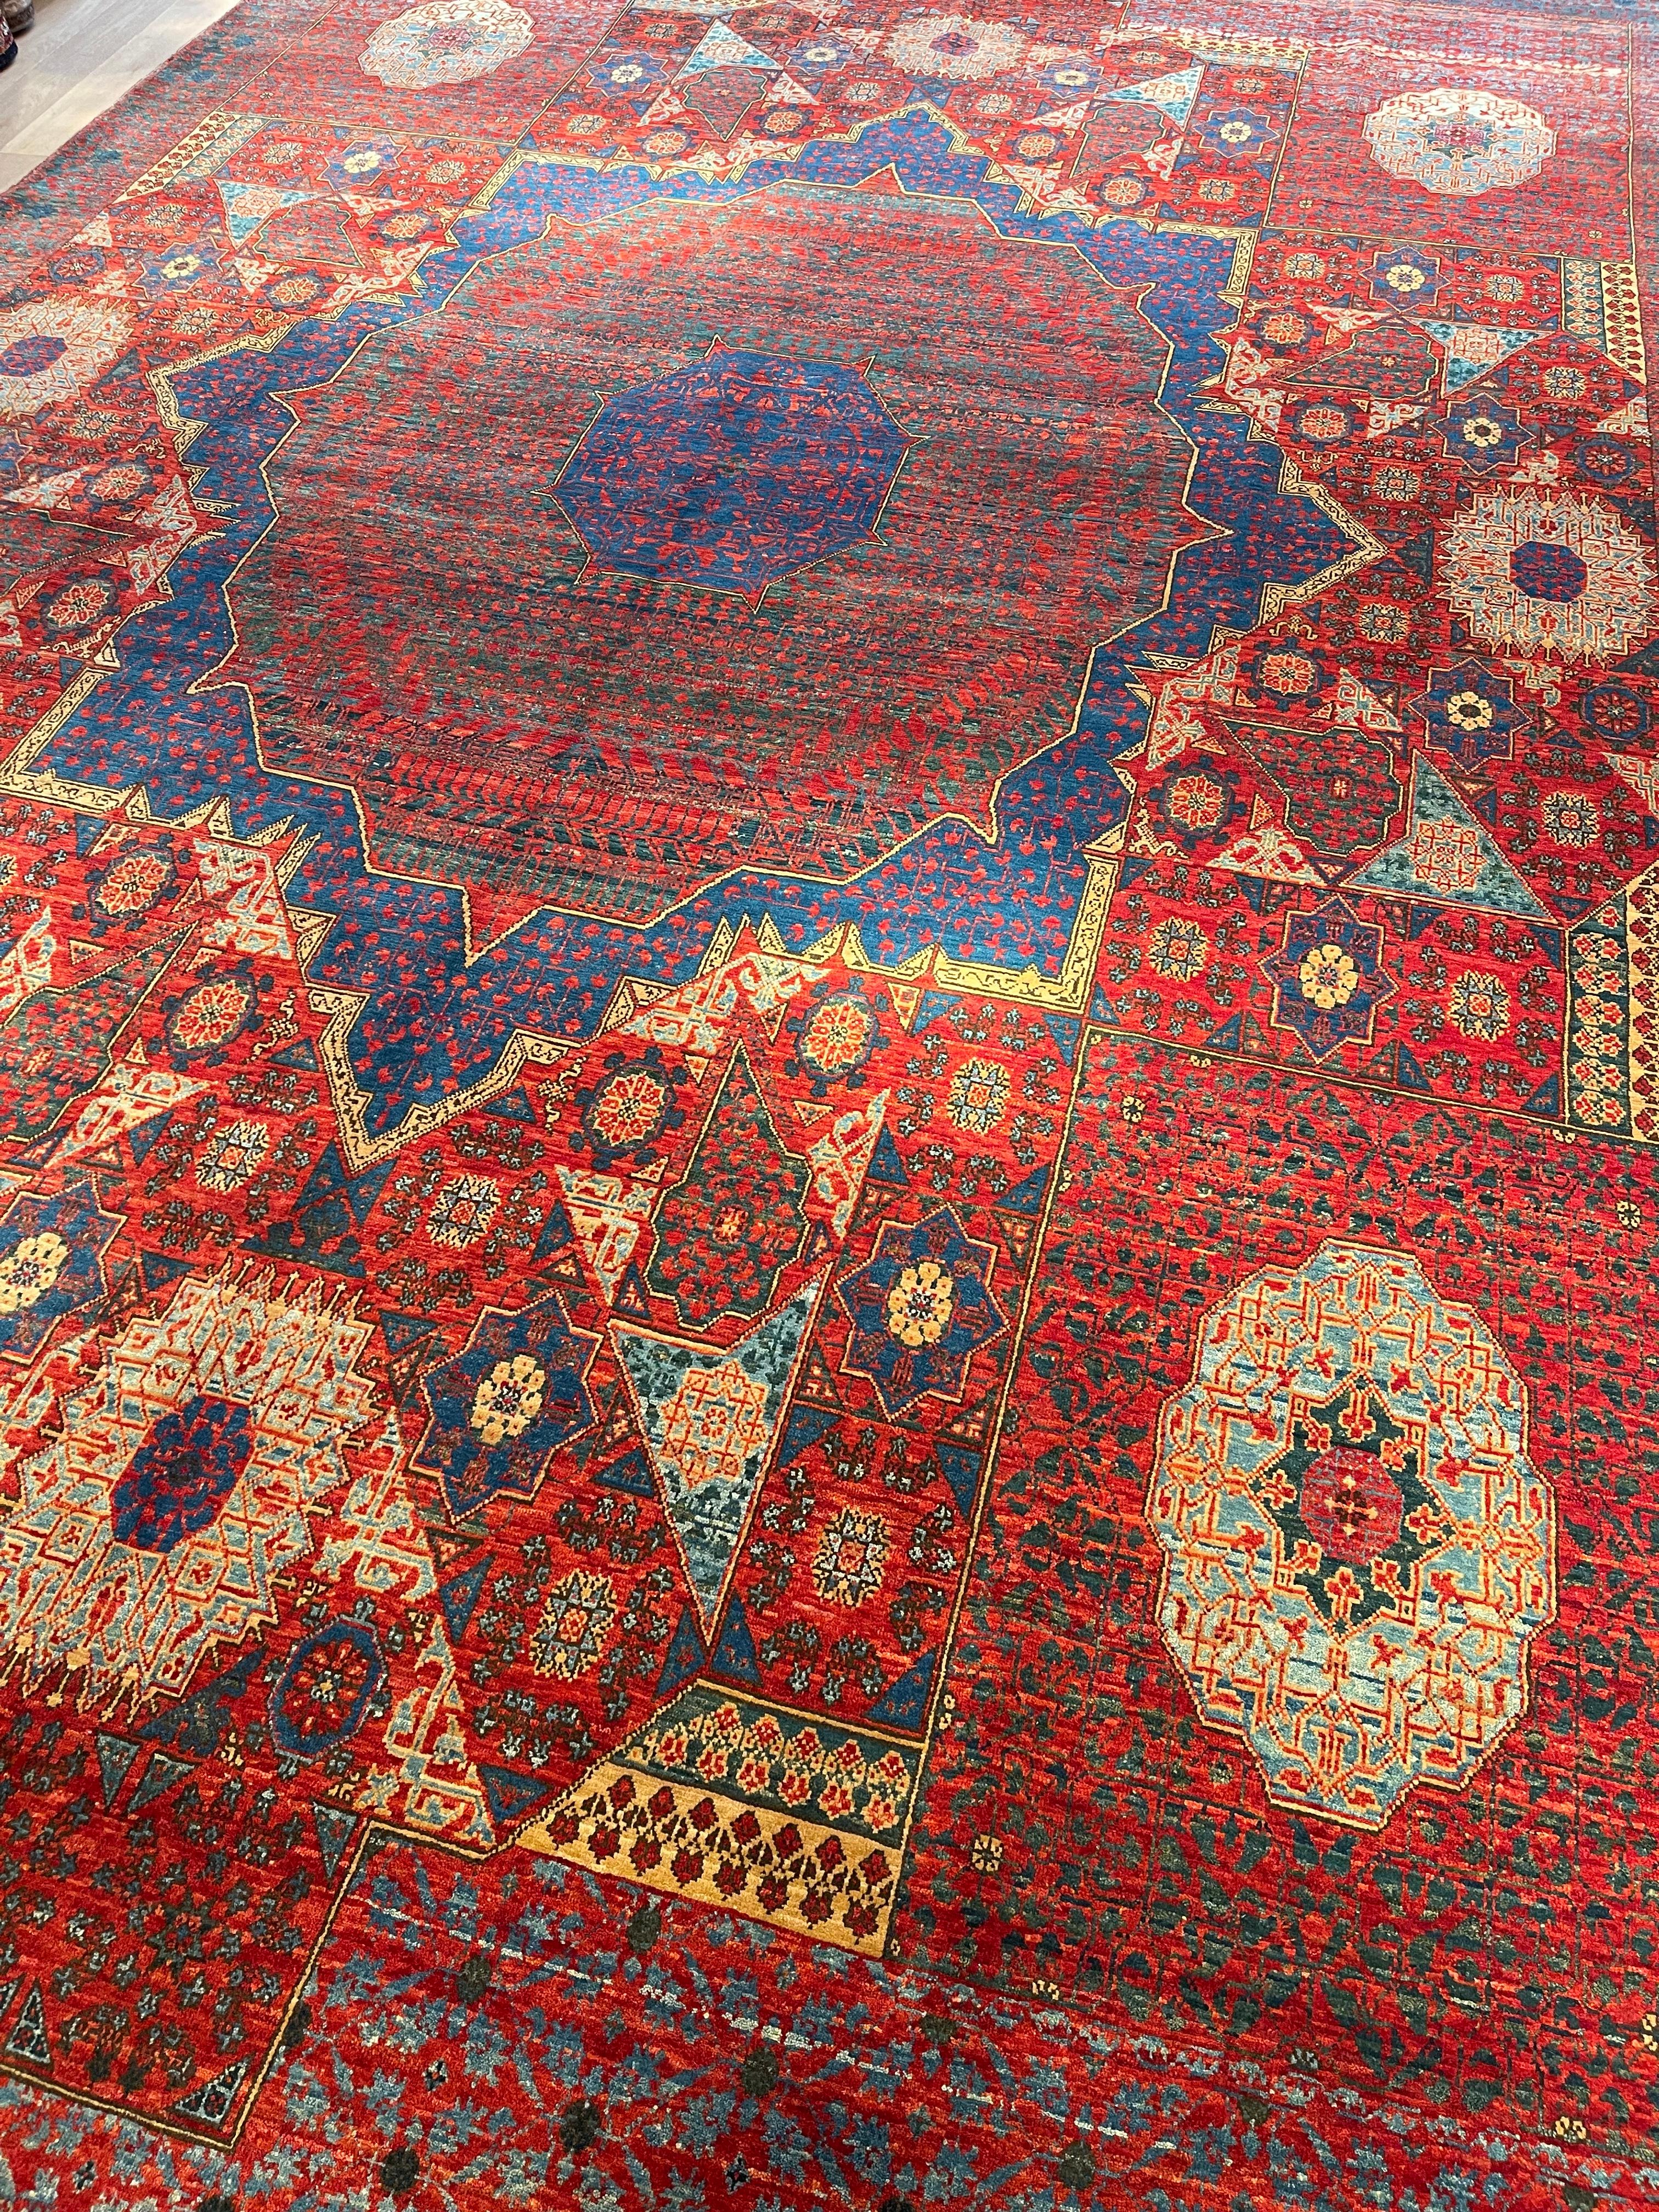 Vegetable Dyed Ararat Rugs Mamluk Carpet with Central Star 16th Century Revival - Natural Dyed For Sale